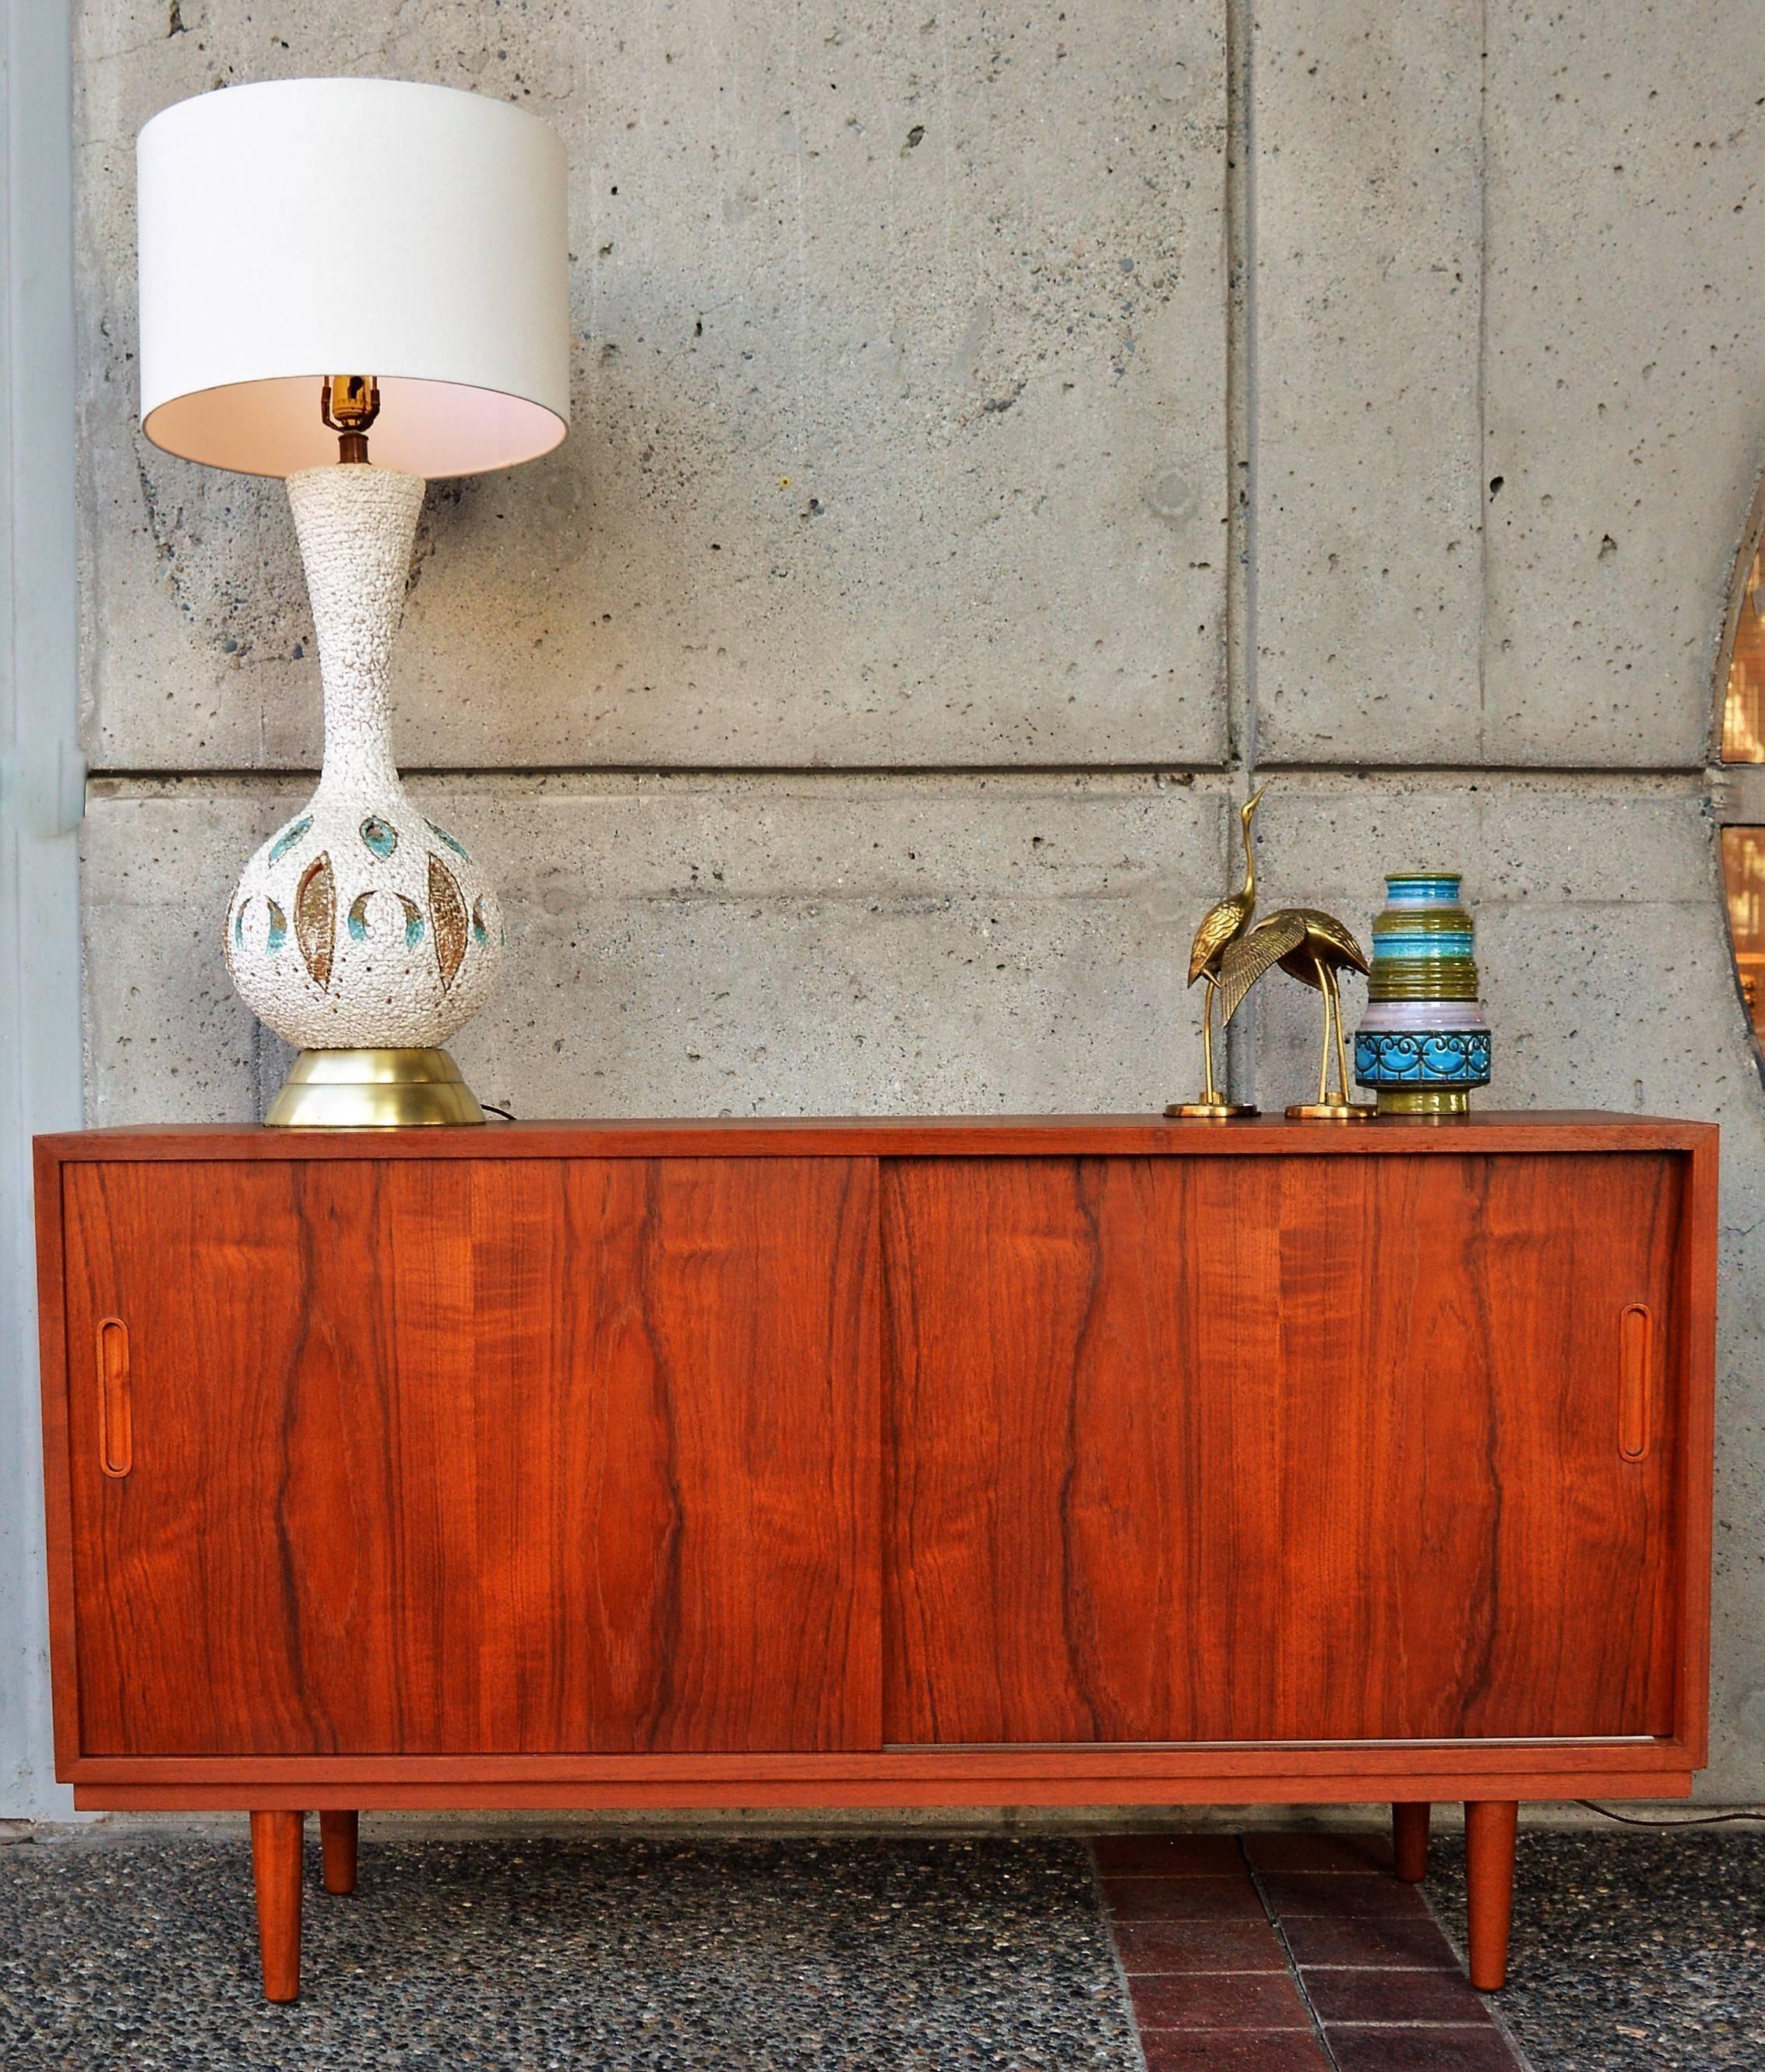 This lovely Danish modern teak buffet or credenza with smaller proportions is all wood construction from the, 1960s. Featuring a birch interior, nice and light in contrast to the rich patina of the body, the interior features three adjustable